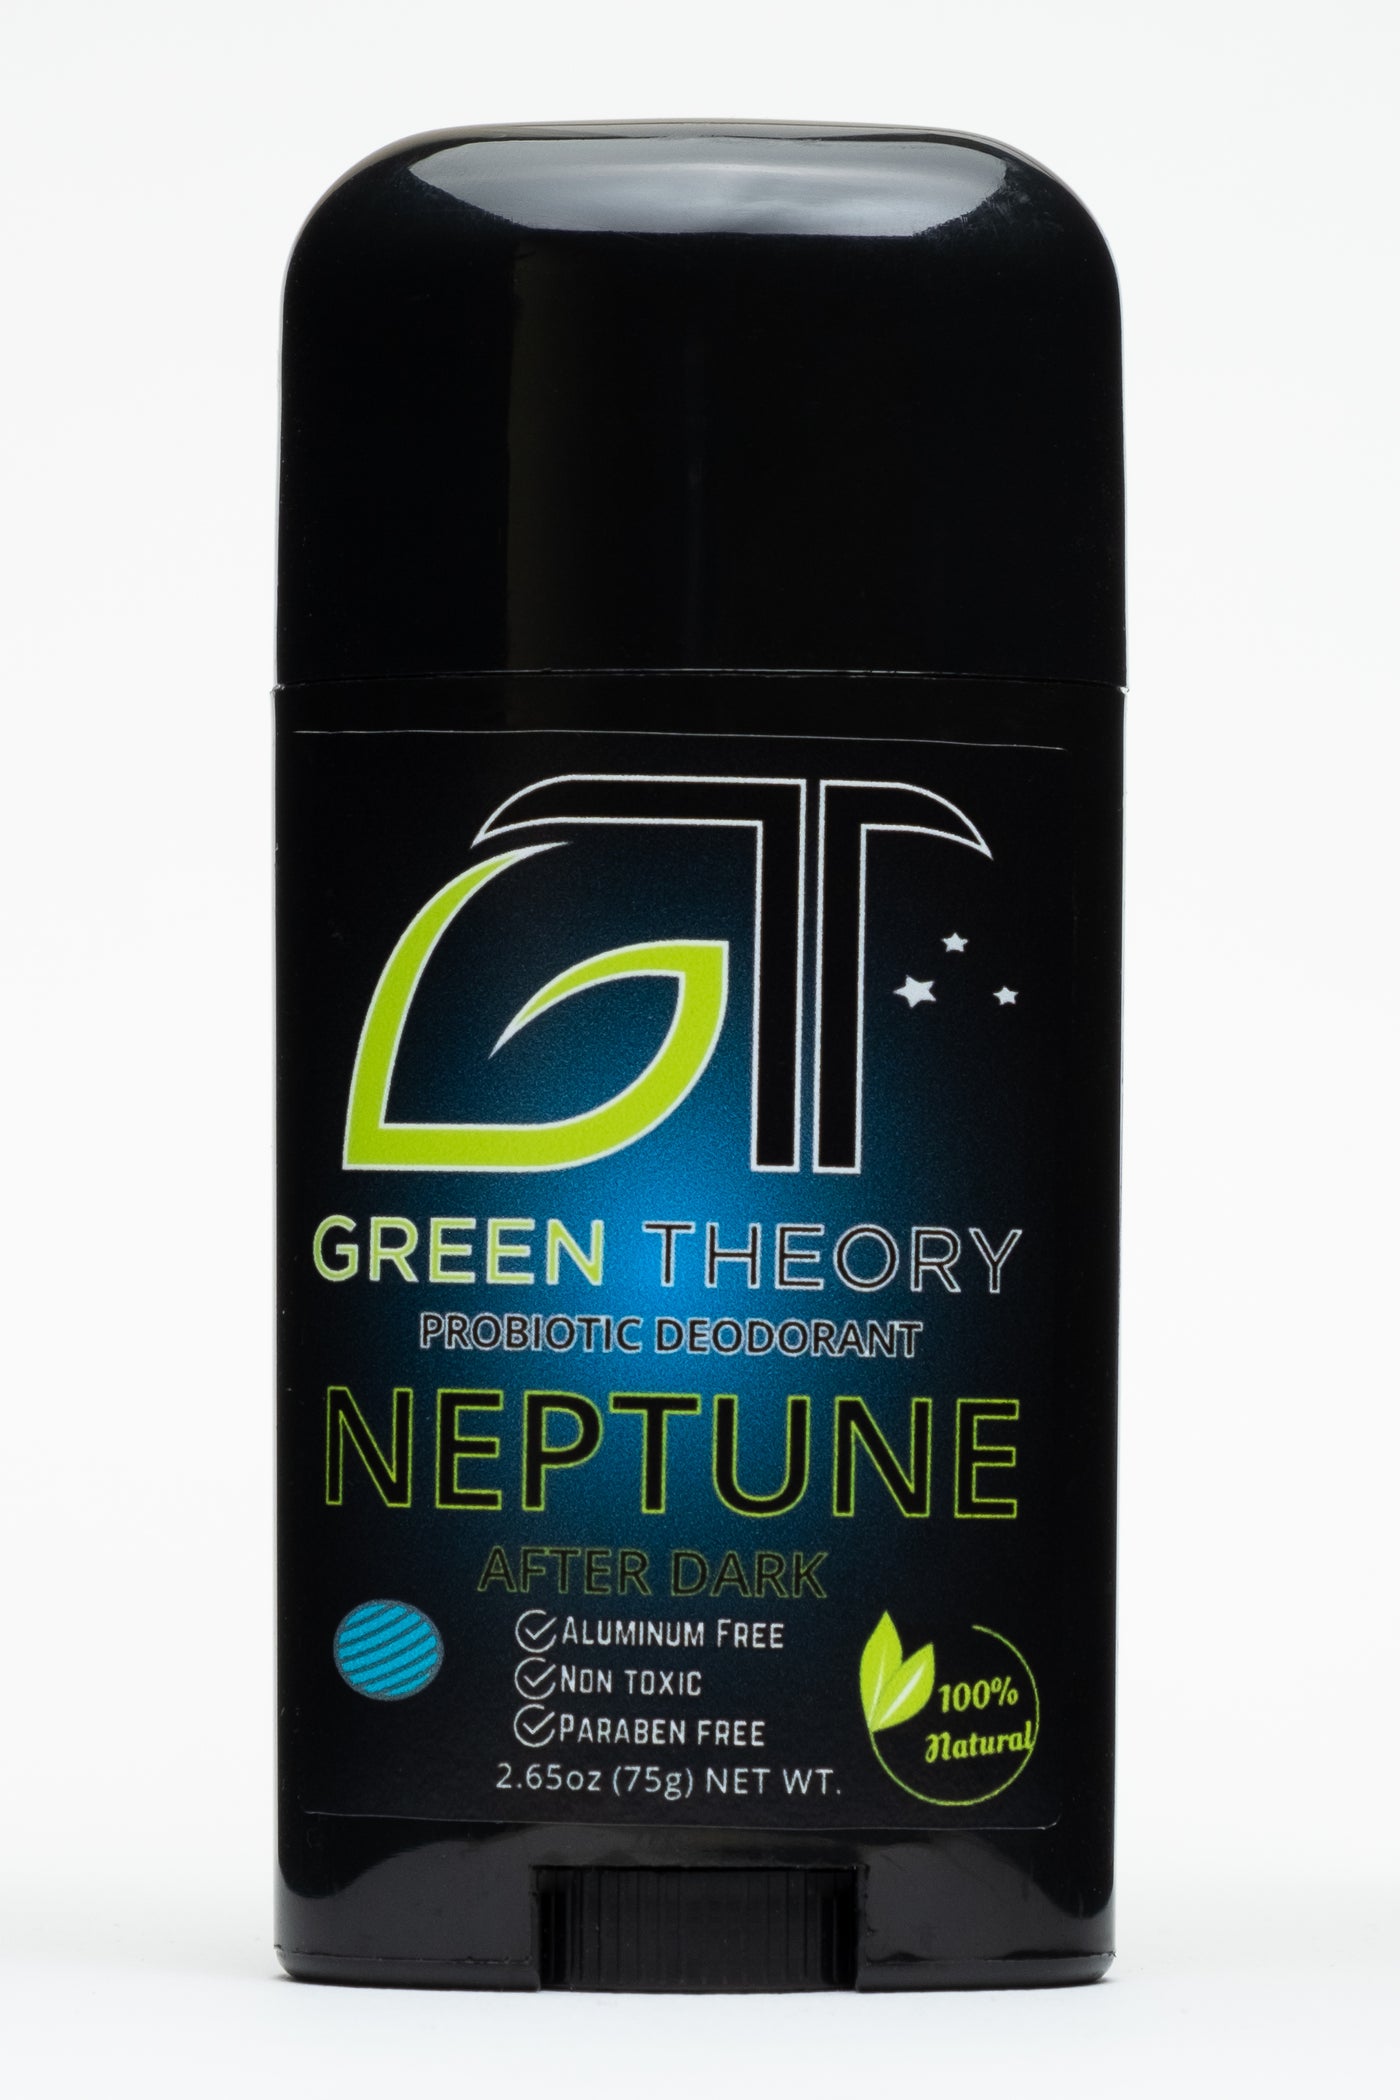 photo of the front label of Green Theory Neptune probiotic aluminum free deodorant. Stick is standing against a white background. Container is a sleek black plastic. Front label features a blue orb in the background. The GT logo is at the top of the label with the G being a stylized image in the shape of a leaf. The word "Neptune" is below the logo and then the benefits "aluminum free", "non toxic", and "paraben free" are listed below.